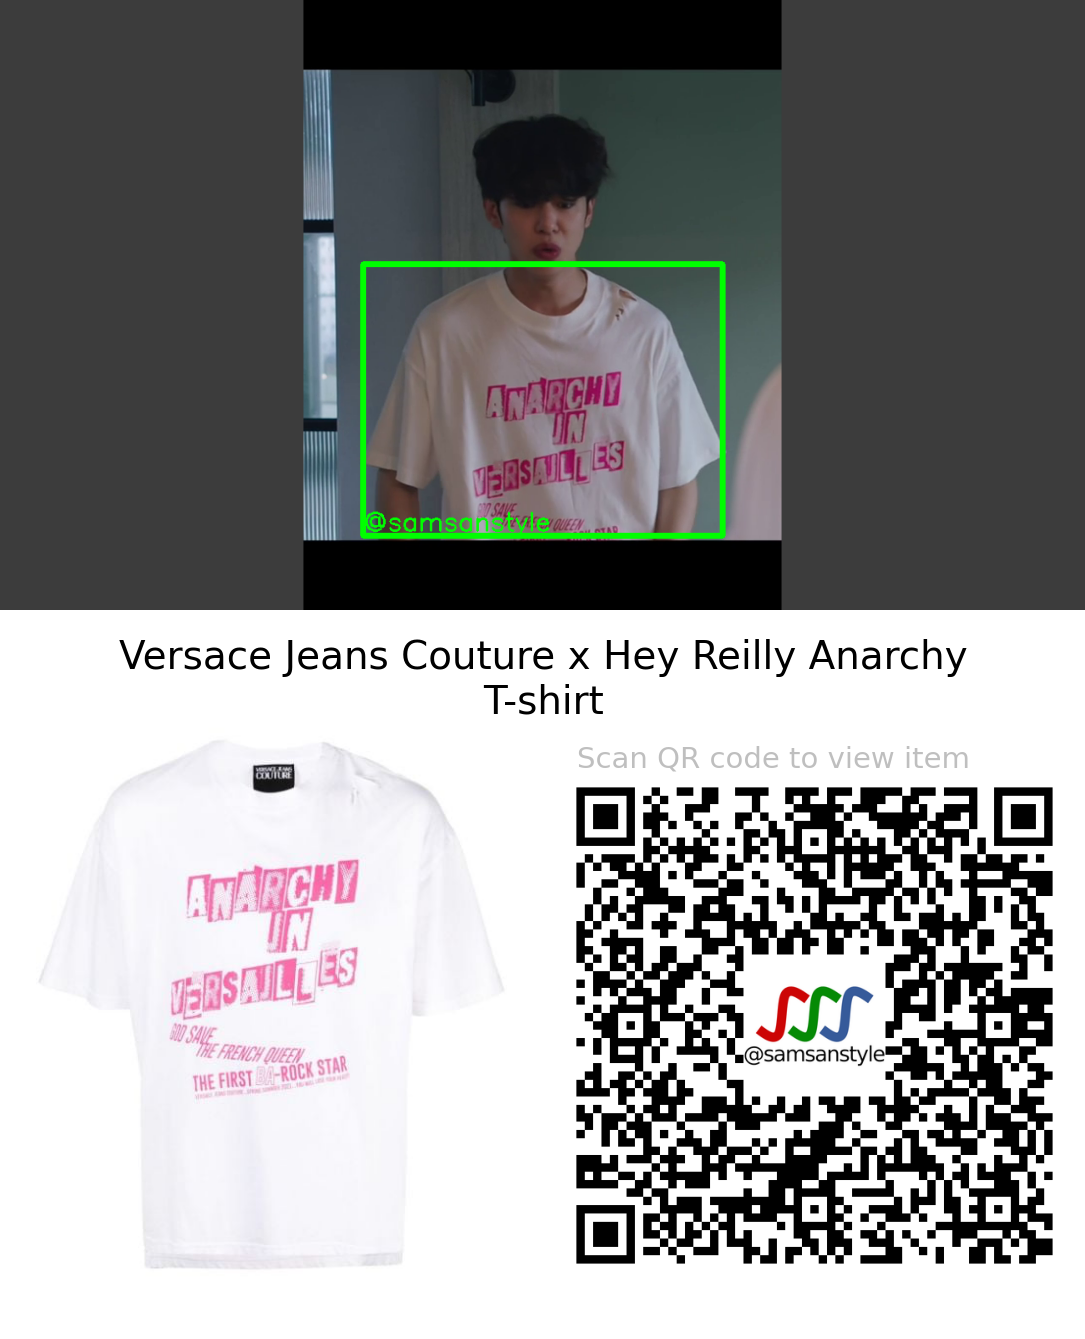 Kim Donghyun | Let Me Be Your Knight E09 | Versace Jeans Couture x Hey Reilly Anarchy T-shirt